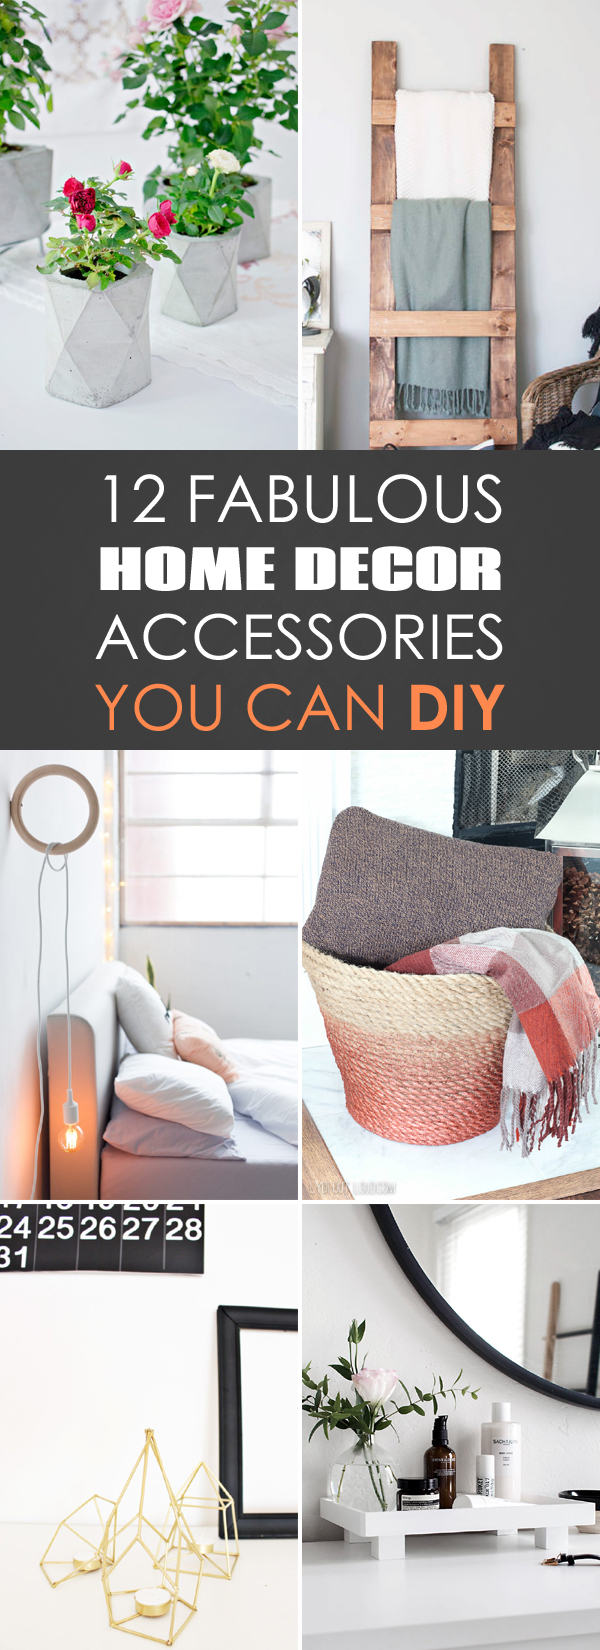 12 Fabulous Home Decor Accessories You Can DIY